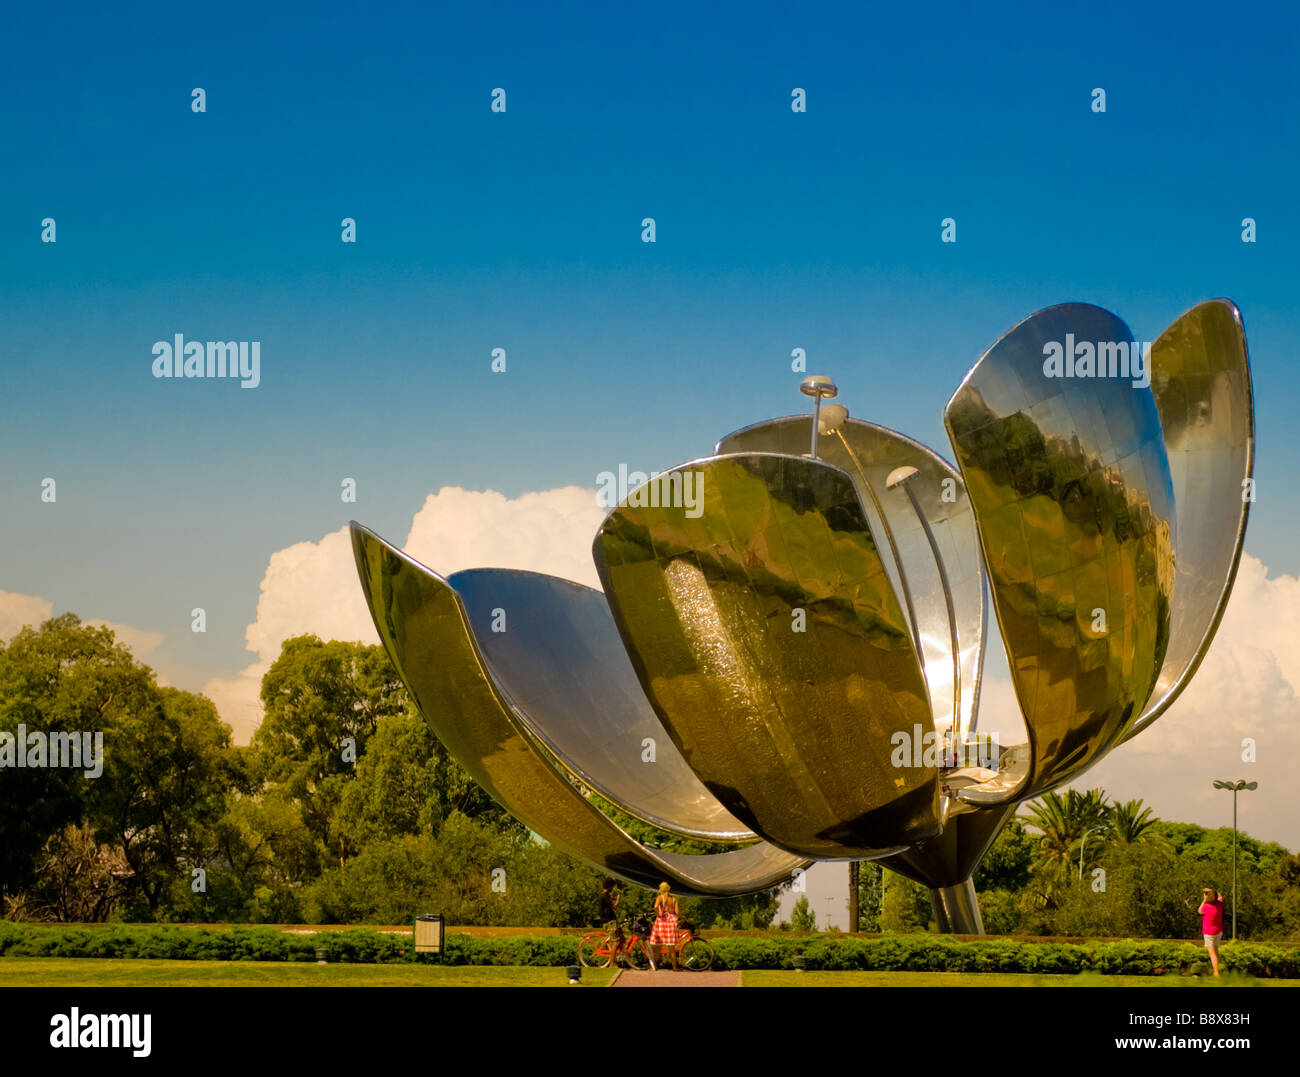 Flower shaped sculpture in the Plaza Naciones Unidas United Nations Plaza - Buenos Aires, Argentina Stock Photo